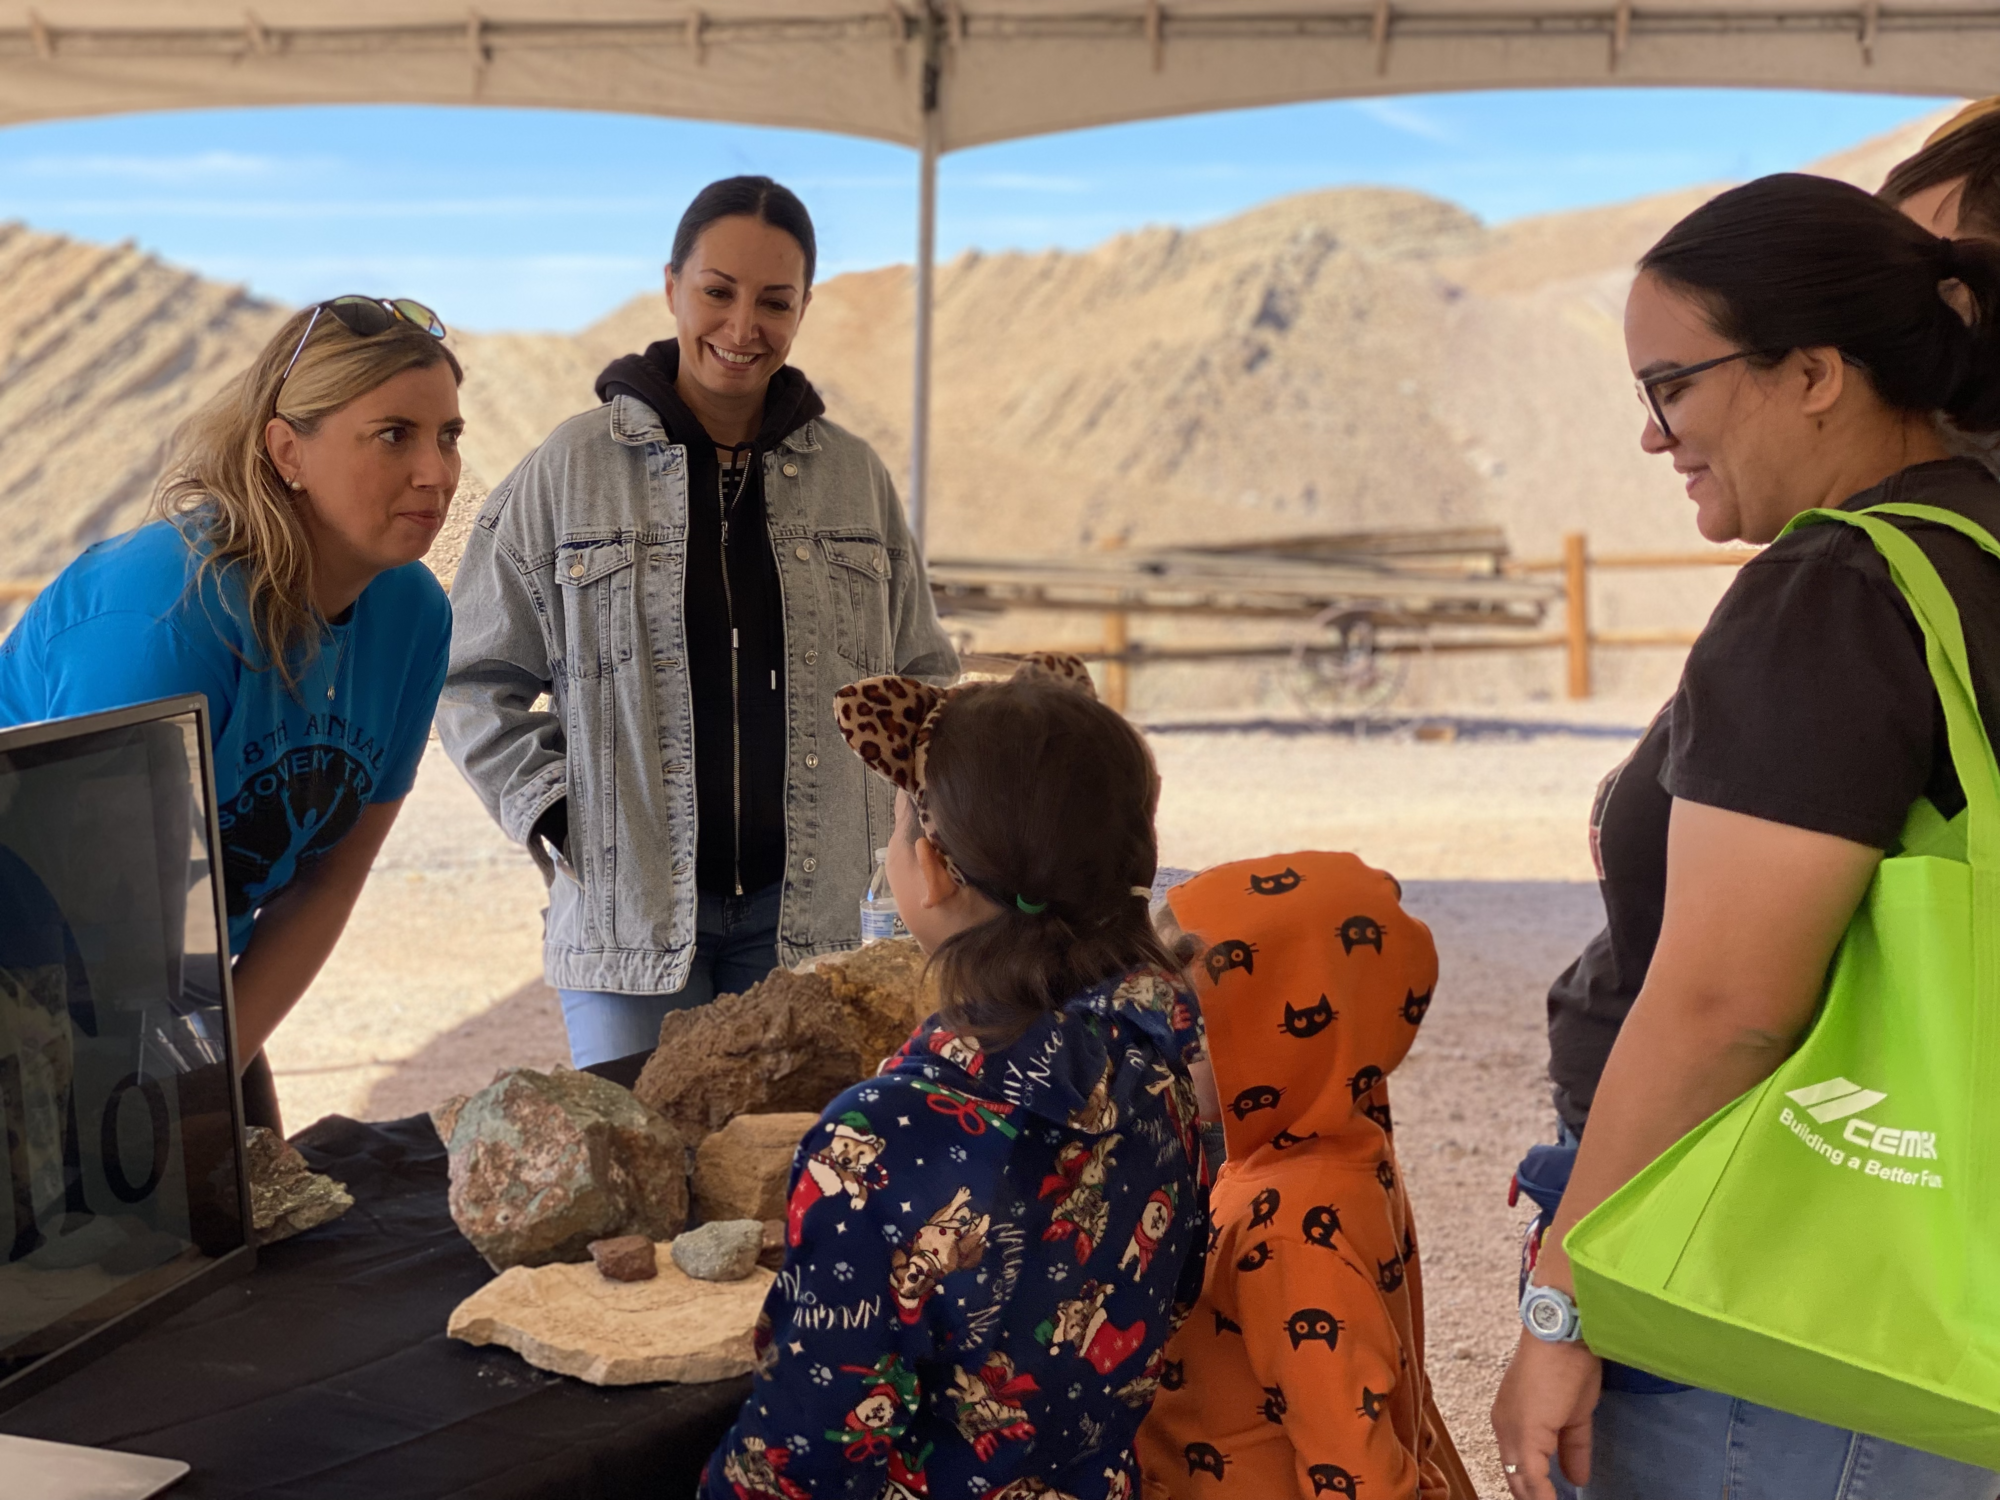 A photo of two female representatives from Apollo Silver Mining are seen talking to children and adults with rock samples on a table.